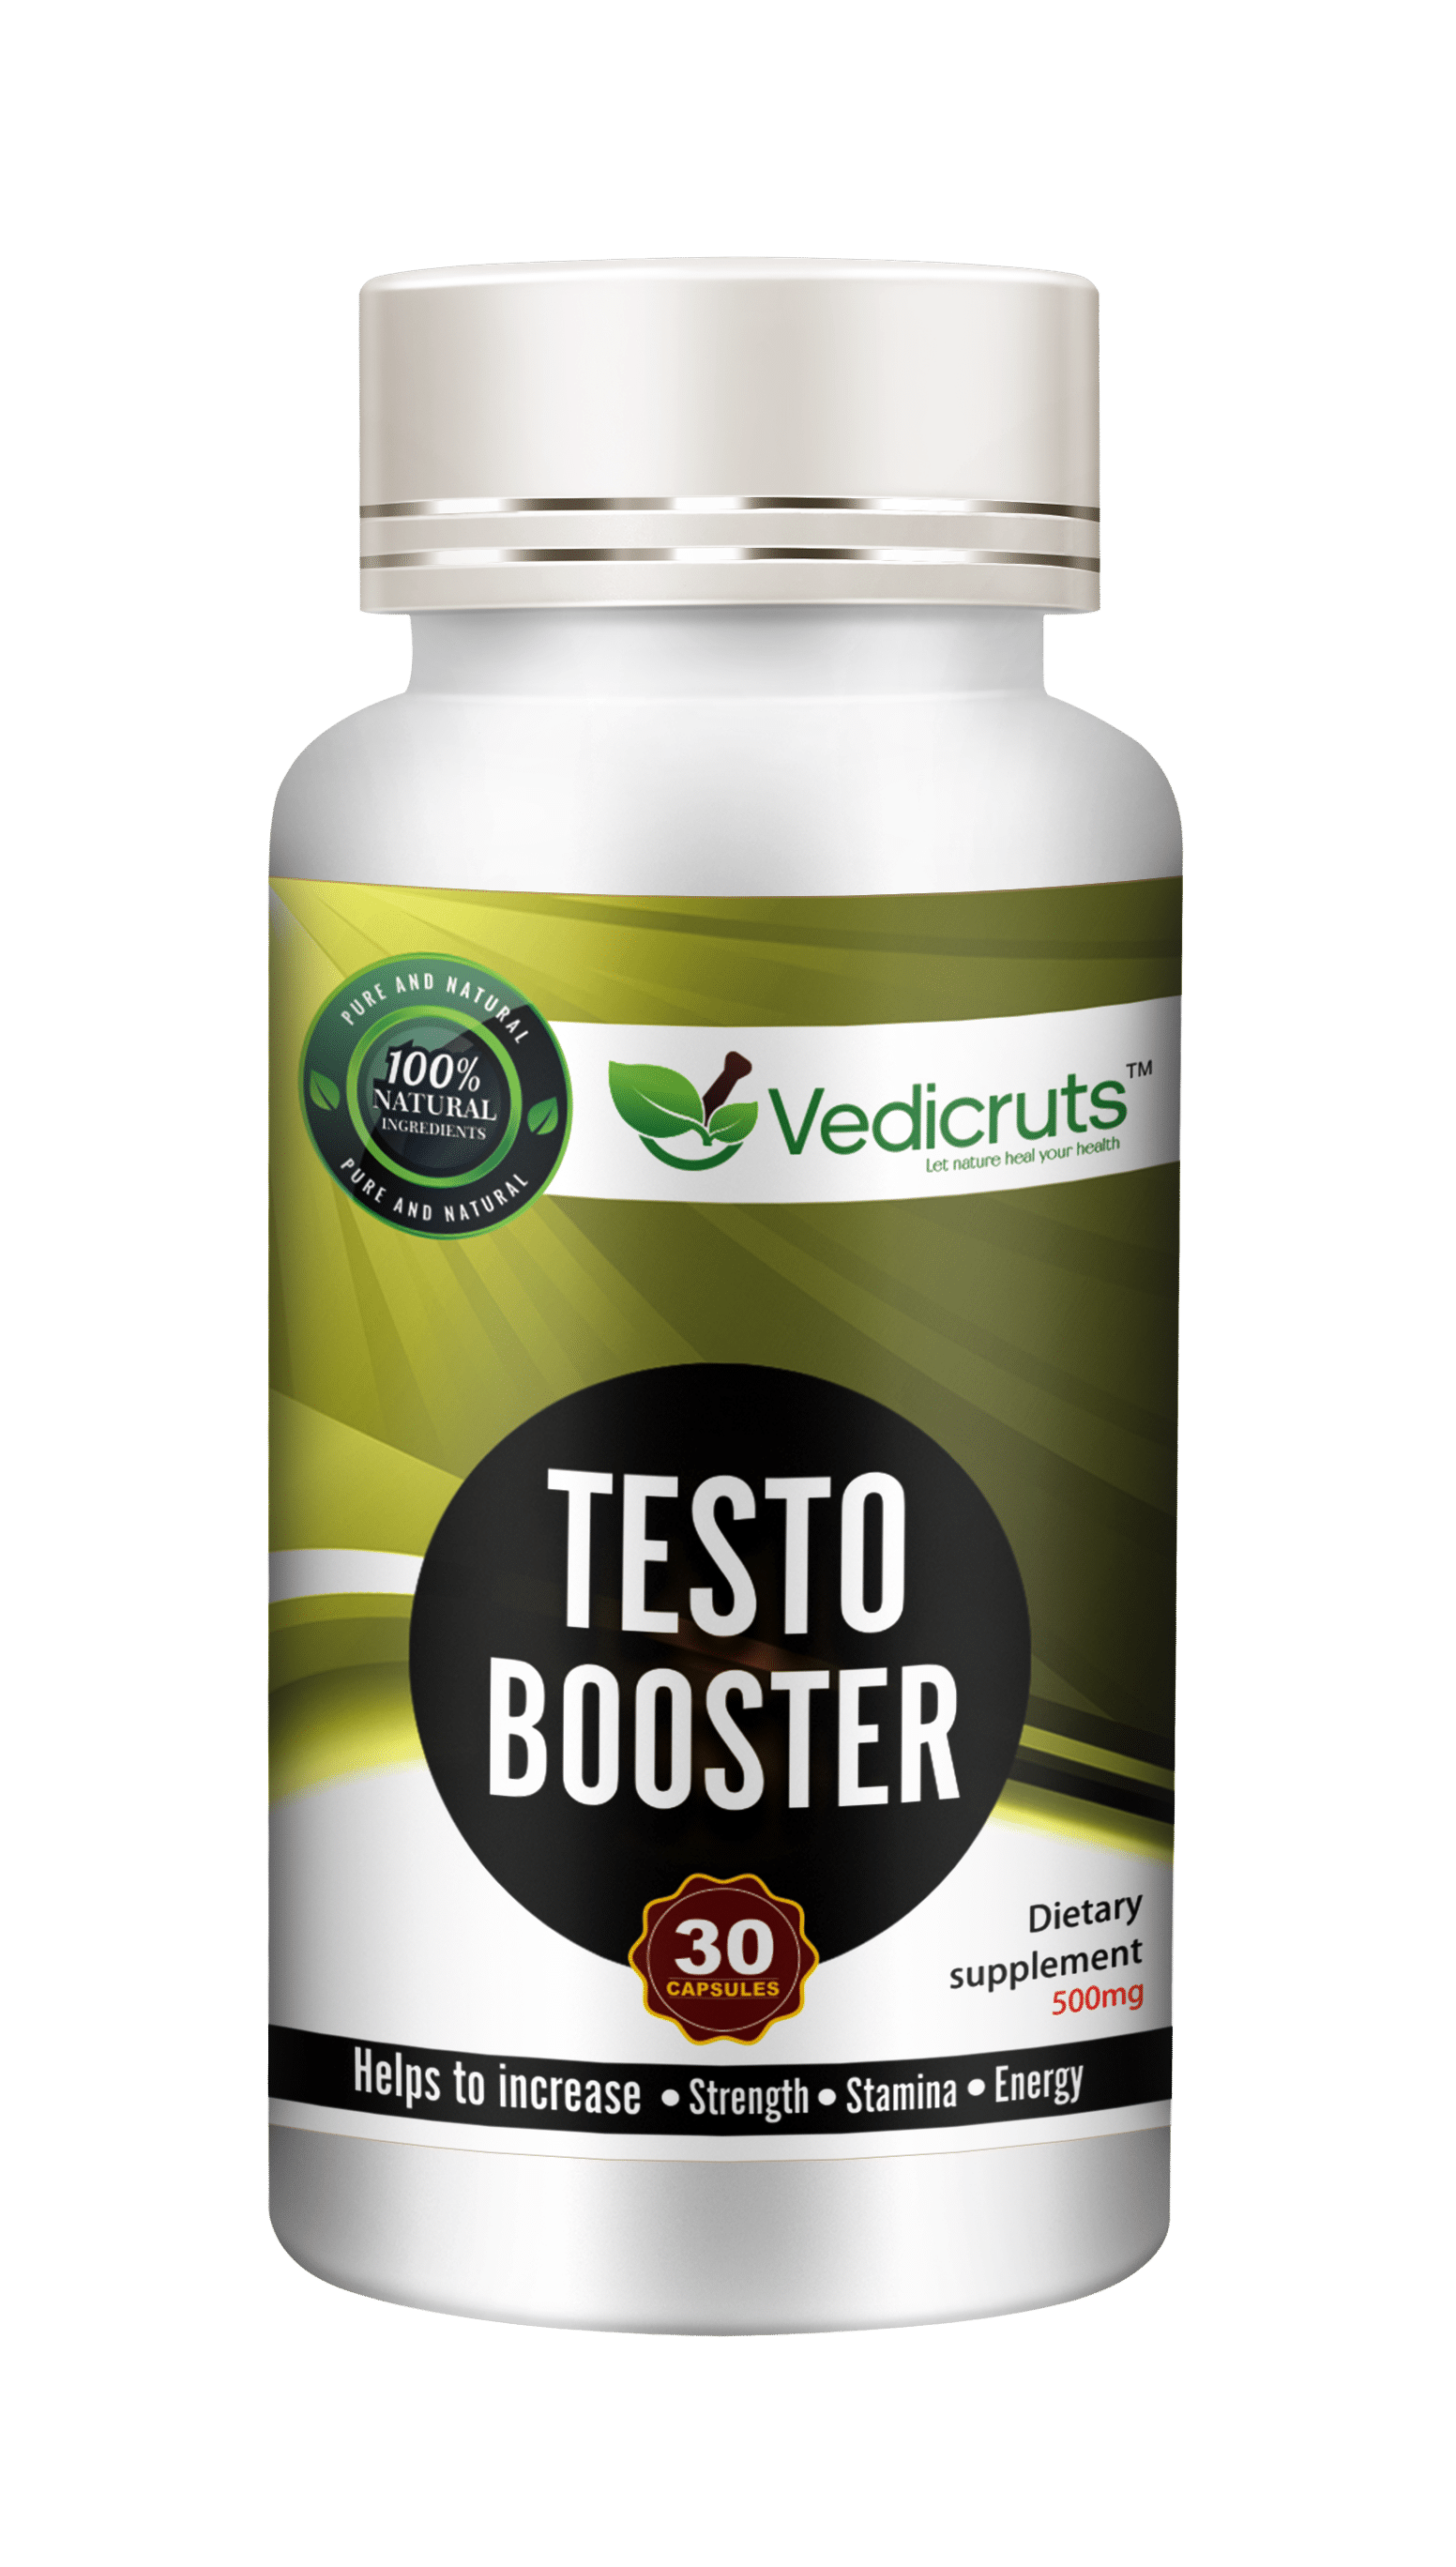 Testo Booster what is it?